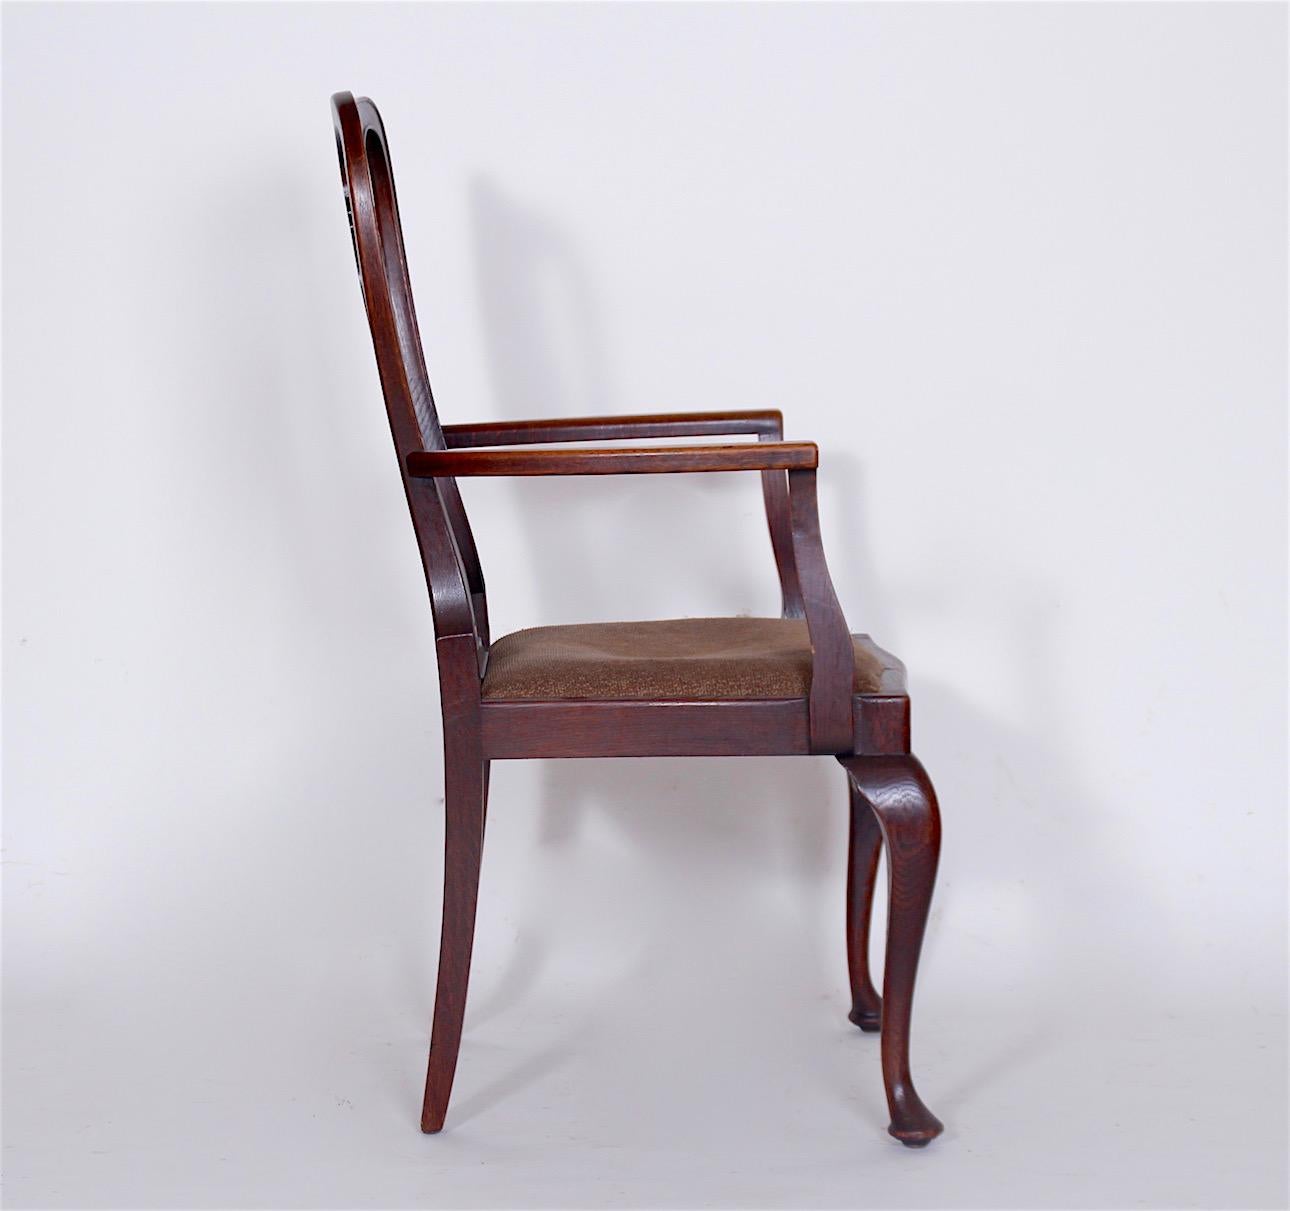 1920s chairs